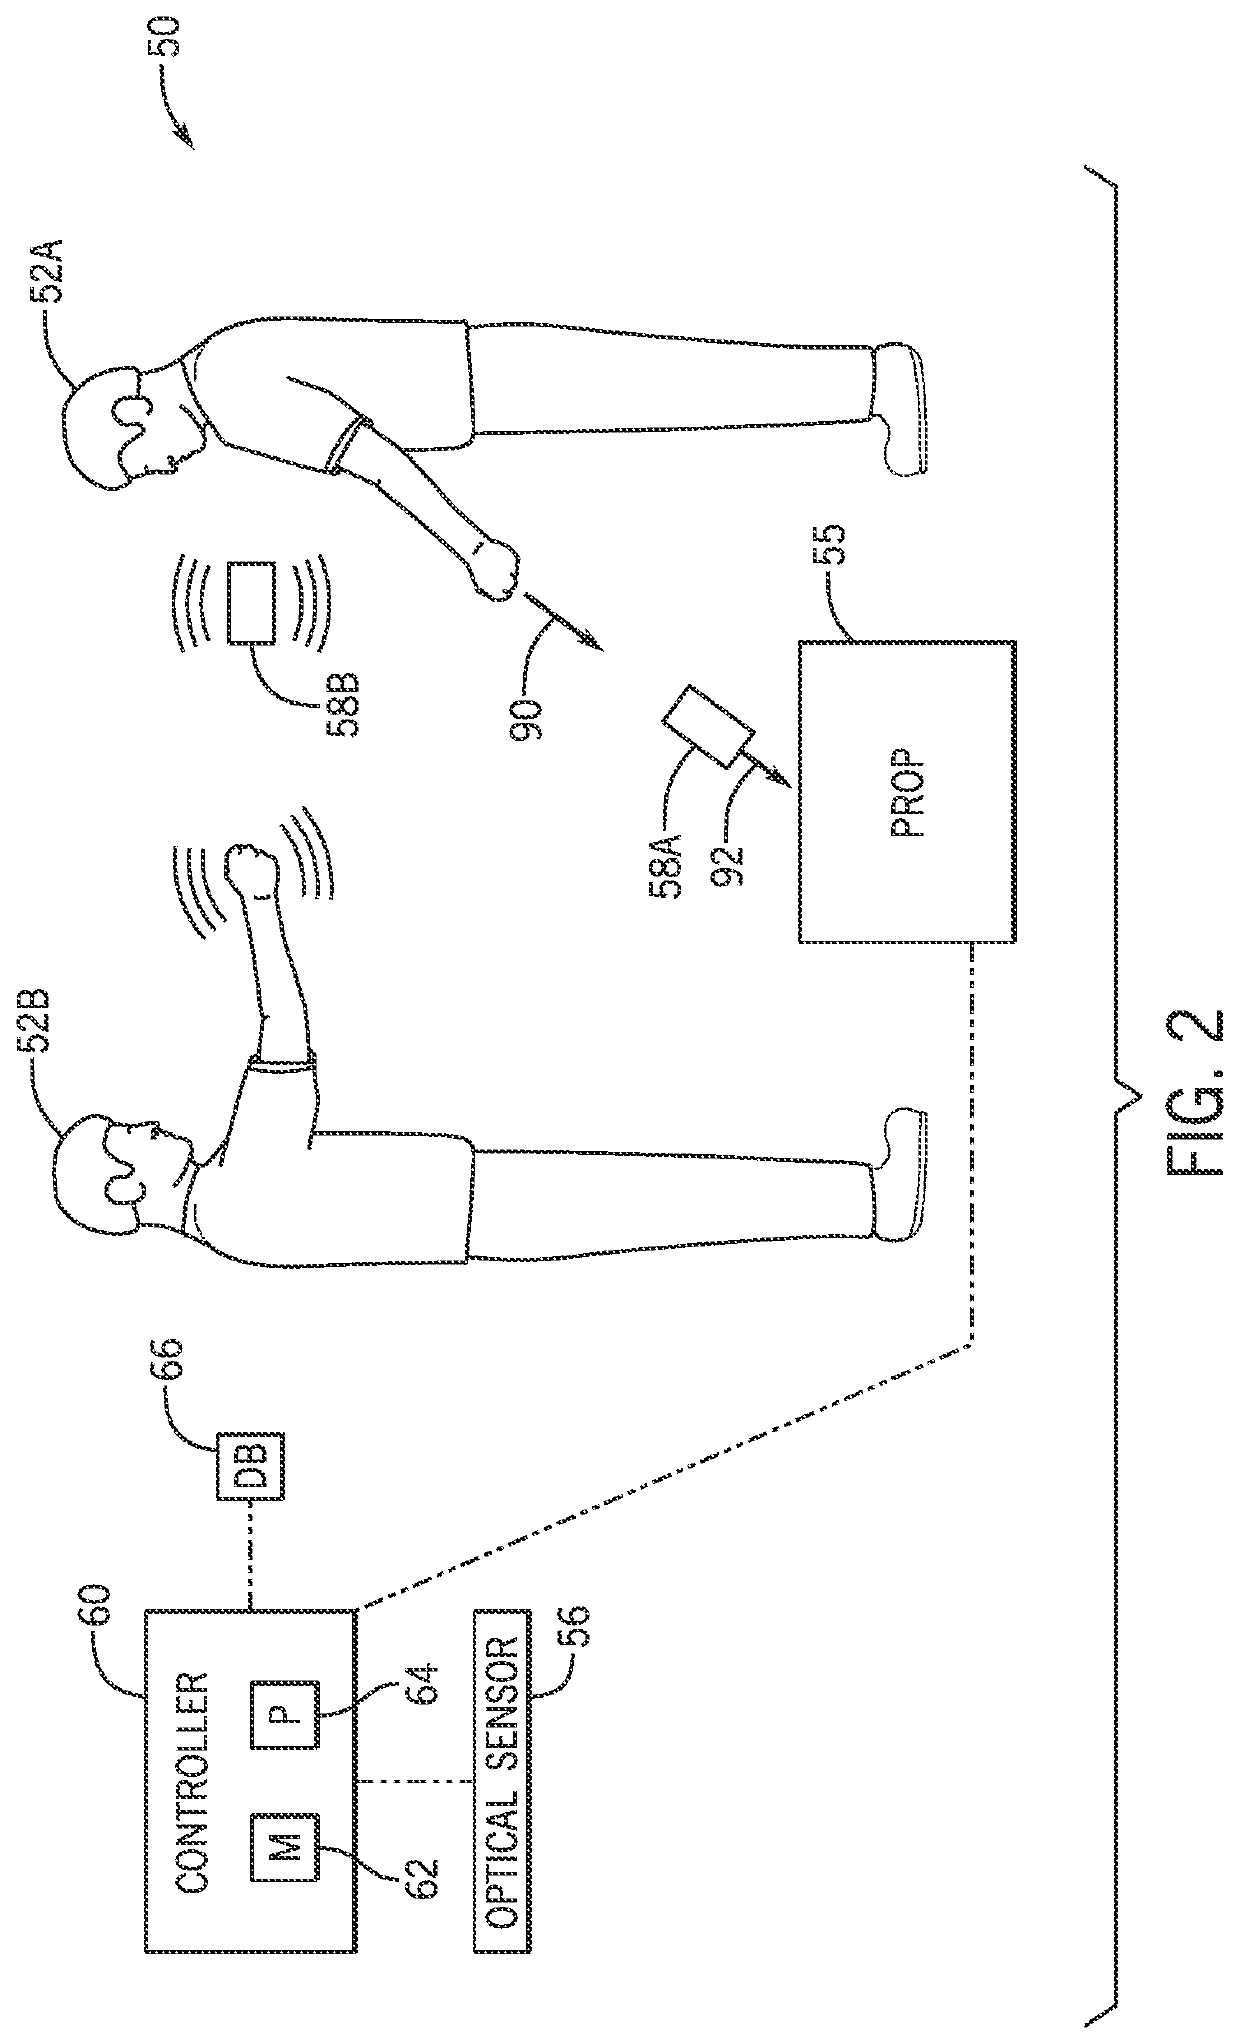 Interactive attraction system and method for object and user association